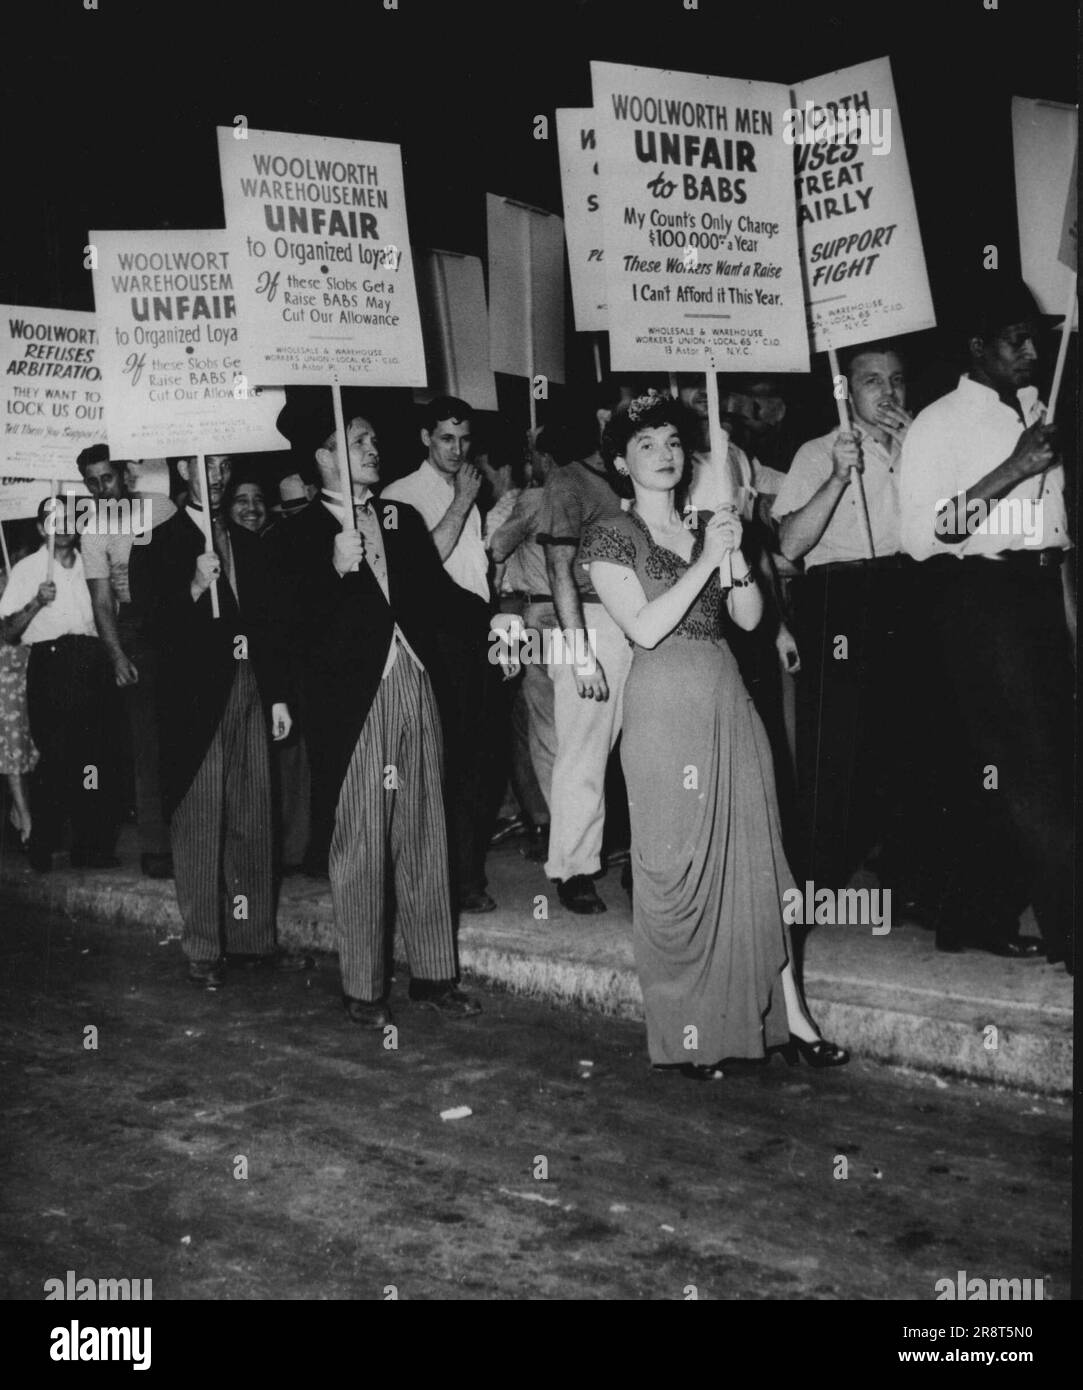 'Babs Hutton' Take off By Woolworth Pickets -- Woolworth warehouse employees and members of local 65, wholesale and warehouse union, picket the Woolworth Building in New York City, June 30, demanding re-signing of the union contract. The girl in evening gown is doing a takeoff on heiress 'Babs' and men in striped, trousers and frock coats picket the pickets. July 22, 1947. (Photo by Associated Press Photo). Stock Photo